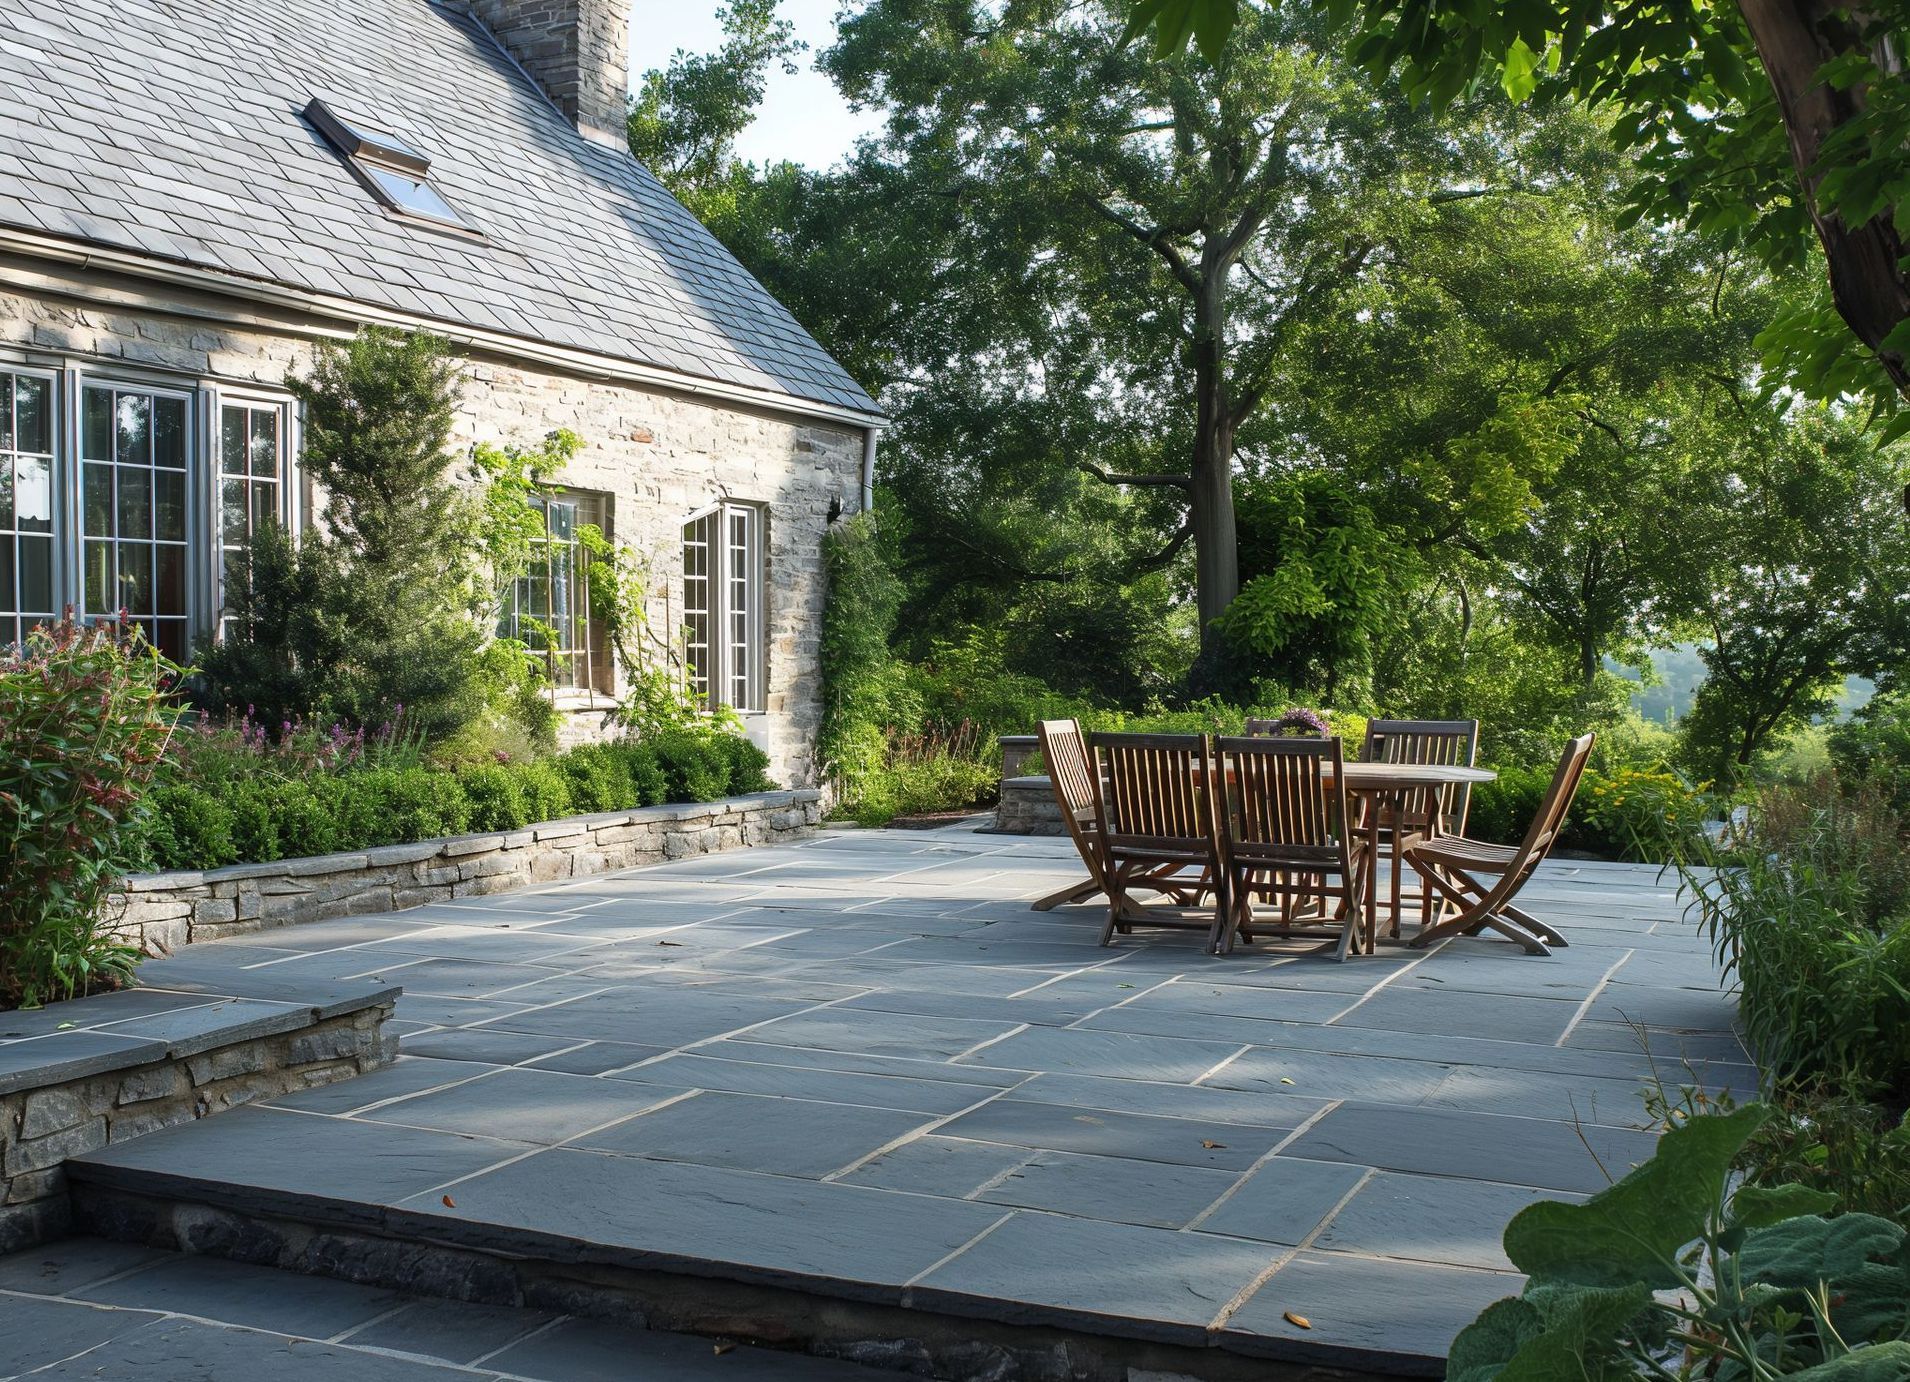 Designing with Pavers: A Selection Guide for Choosing the Right Type, Style, and Pattern